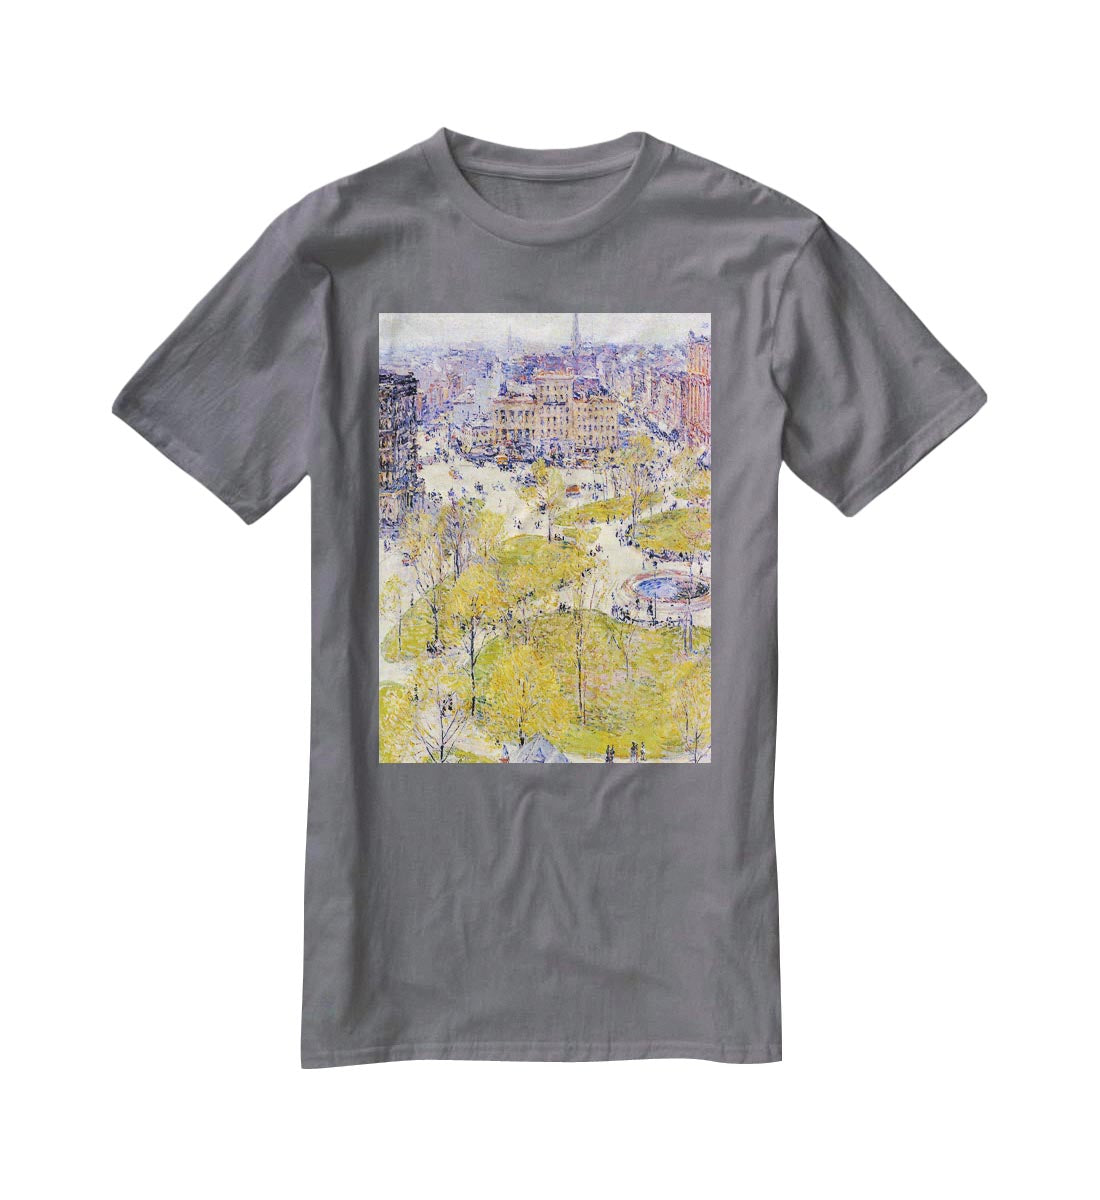 Union Square in Spring by Hassam T-Shirt - Canvas Art Rocks - 3